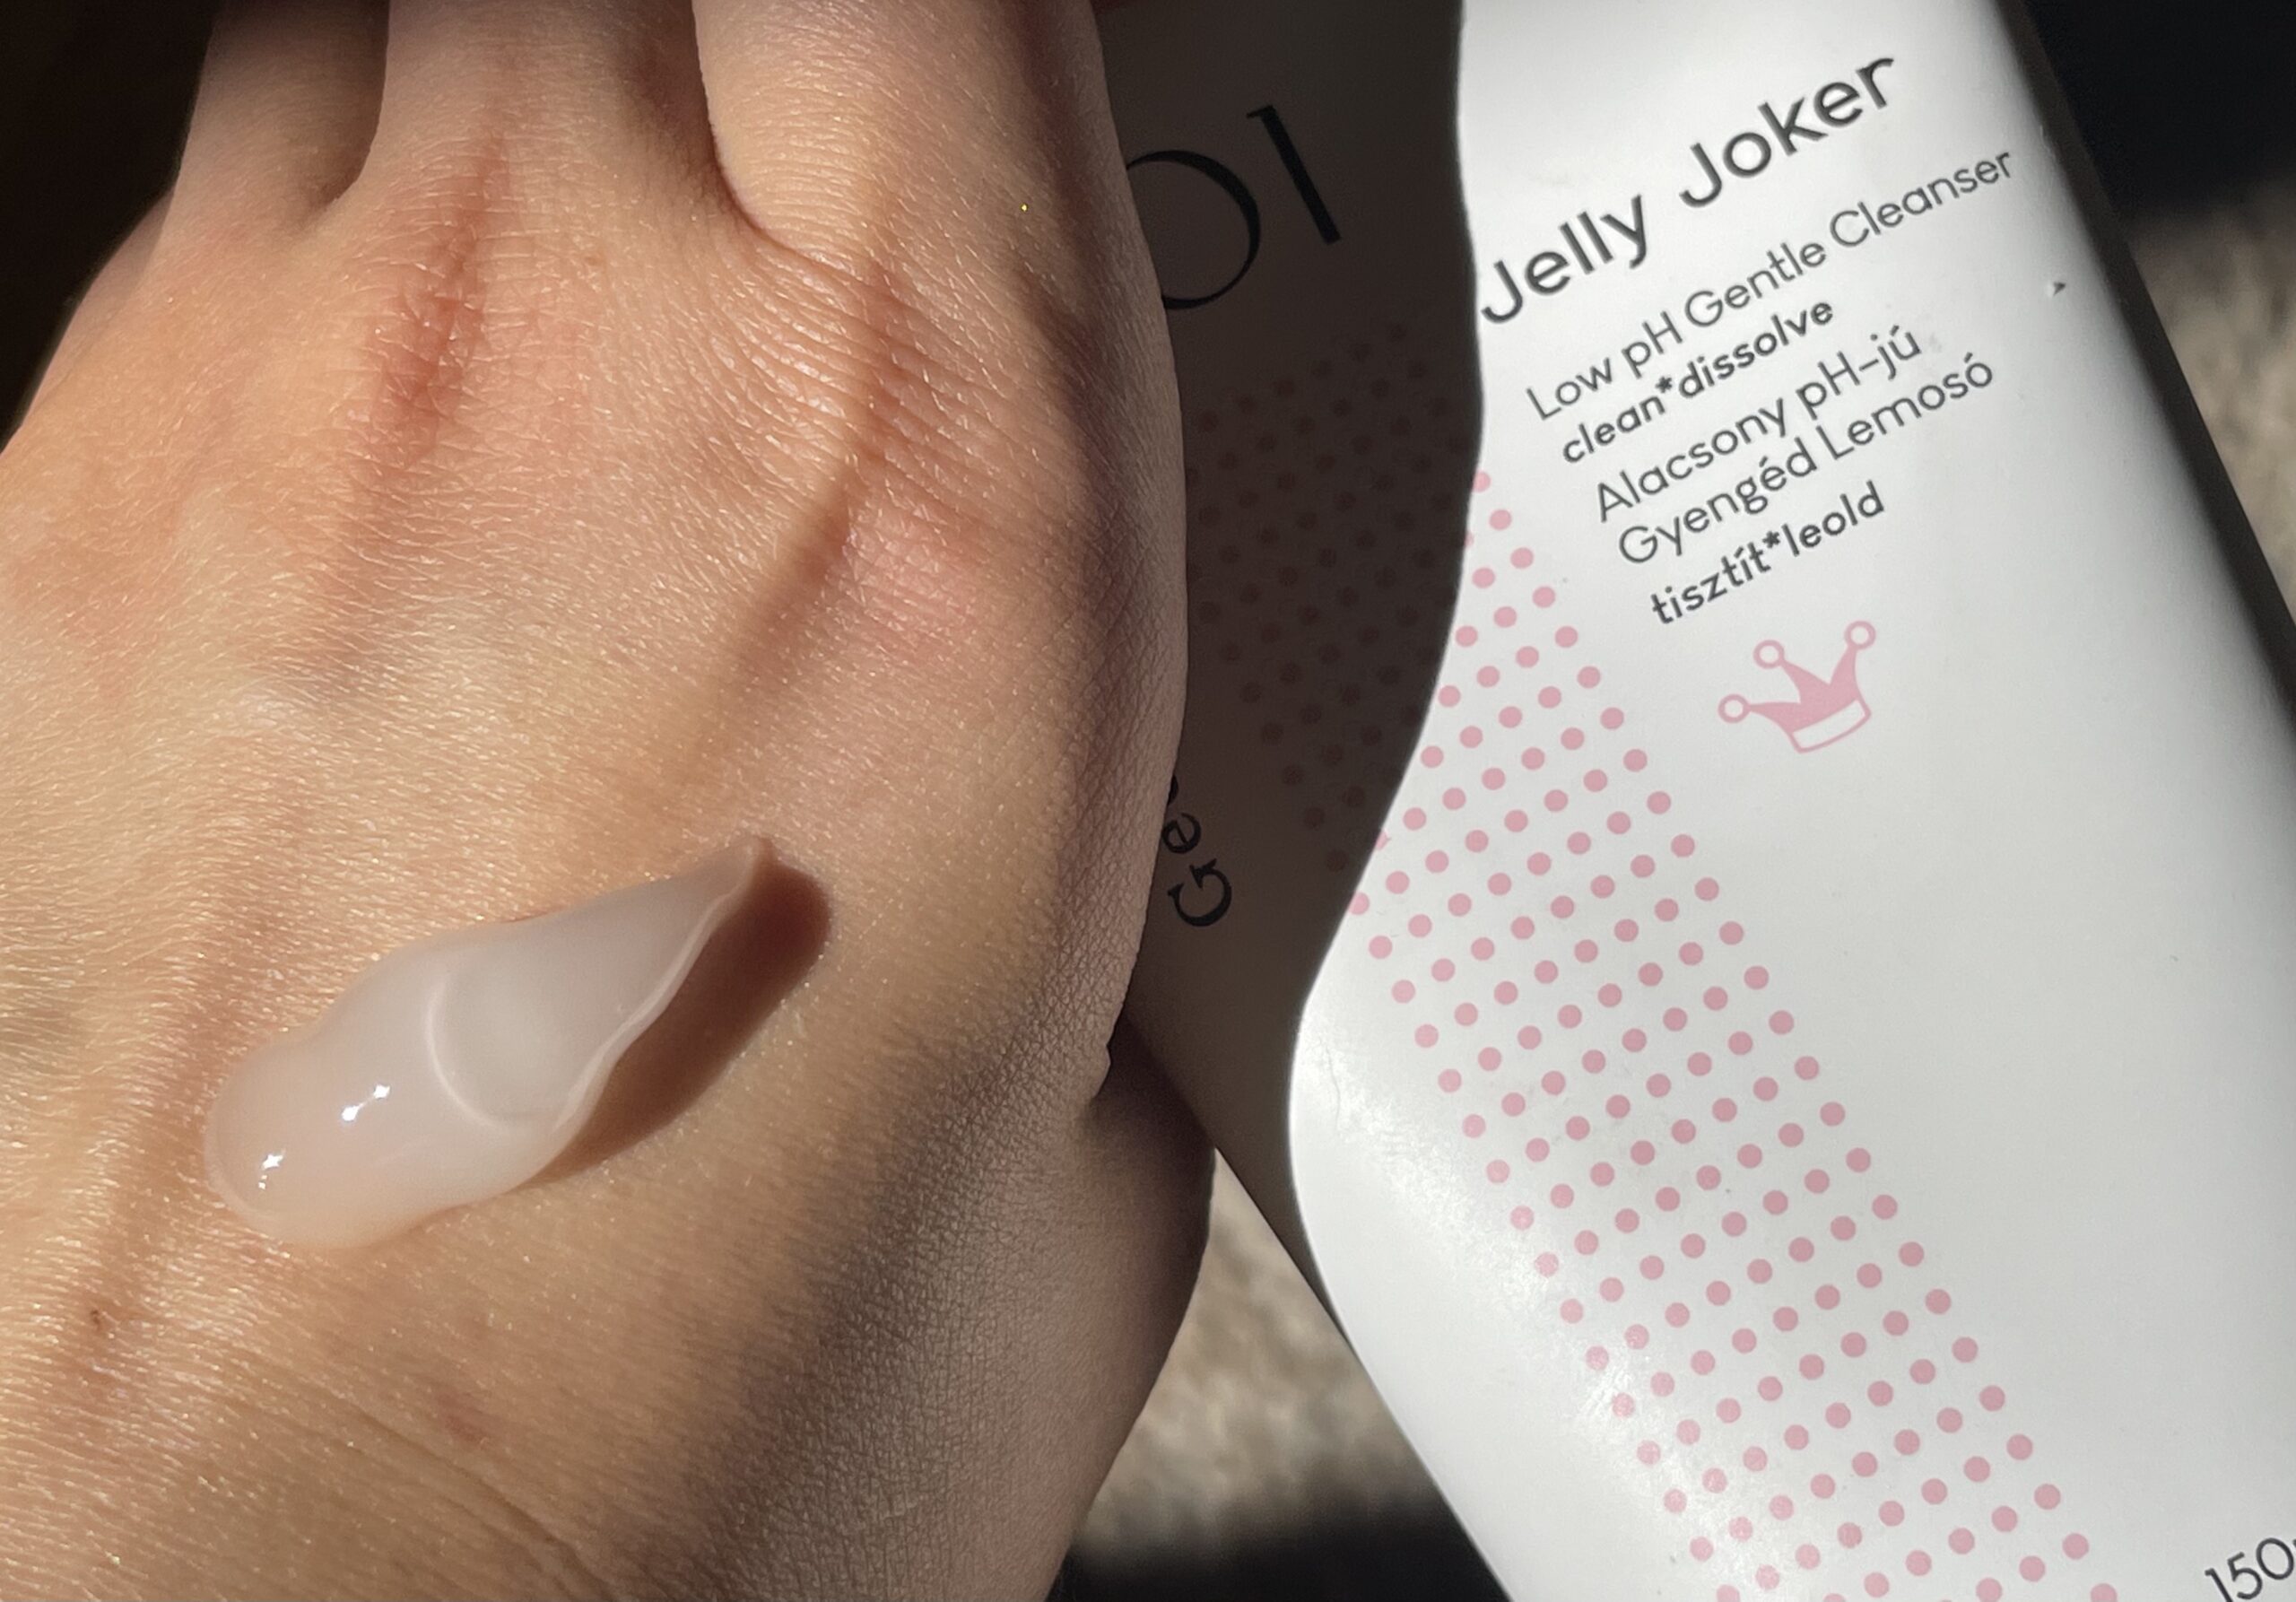 Geek gorgeous jelly cleanser